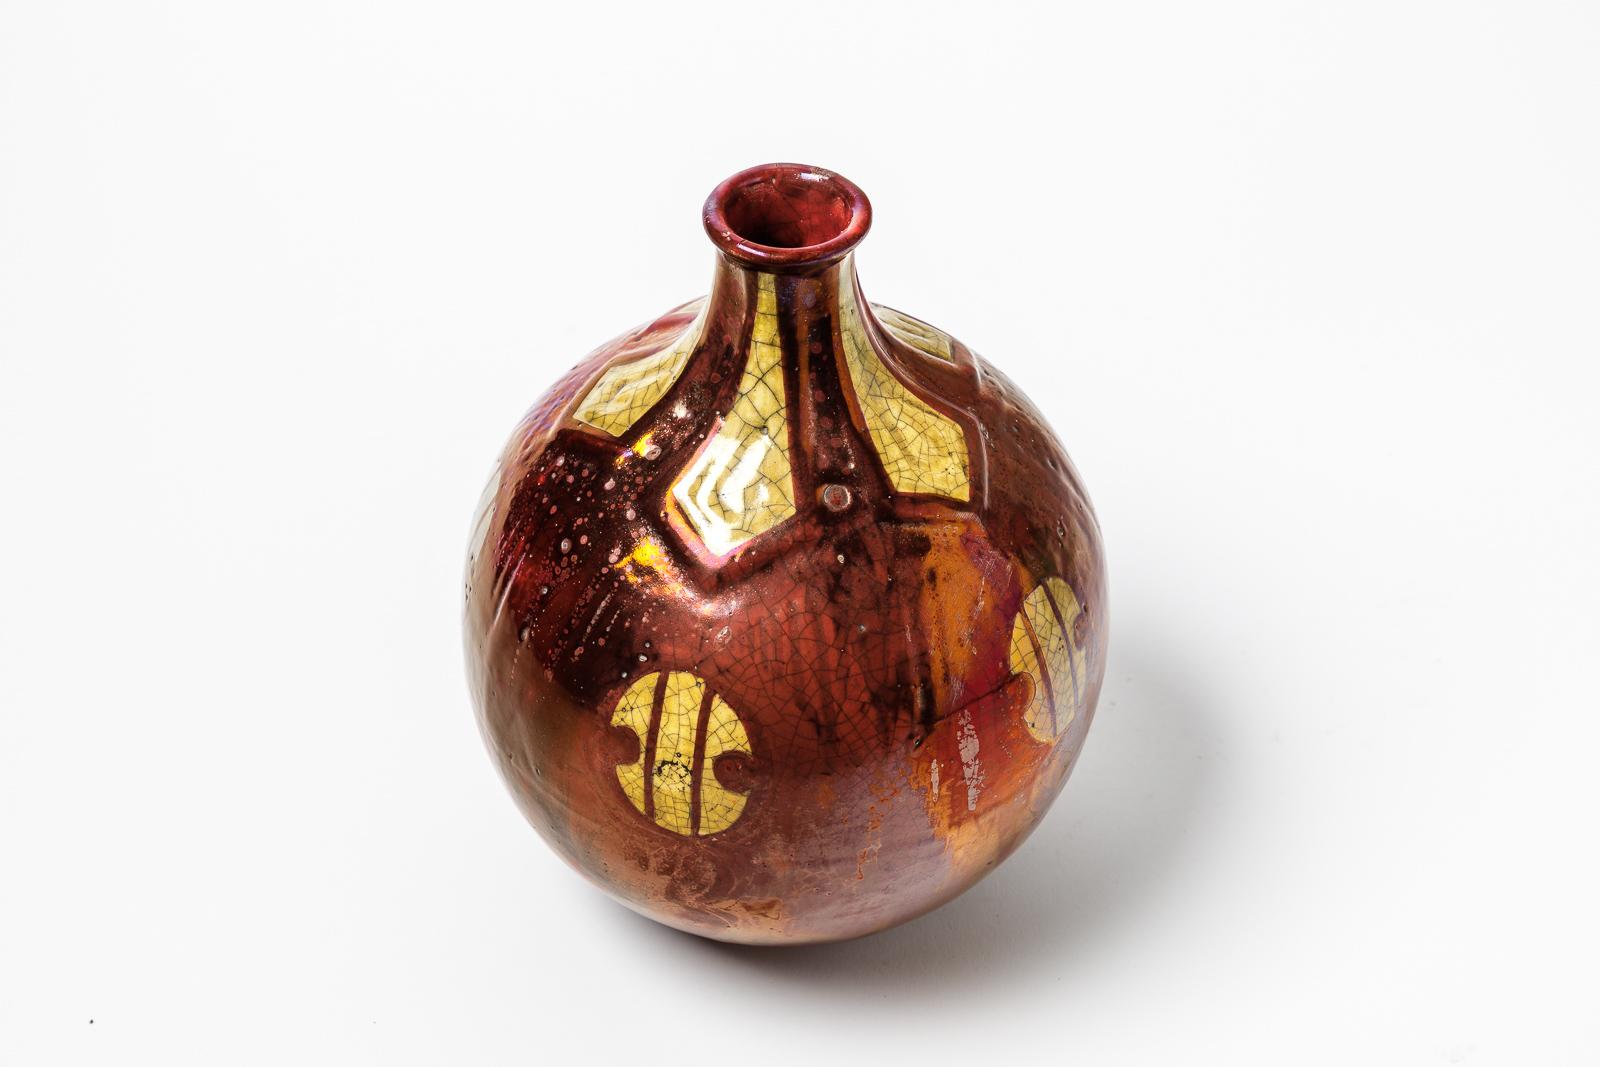 20th Century Precious Art Deco 1930 Red and Yellow Ceramic Vase by Emile and Bruneau Balon For Sale